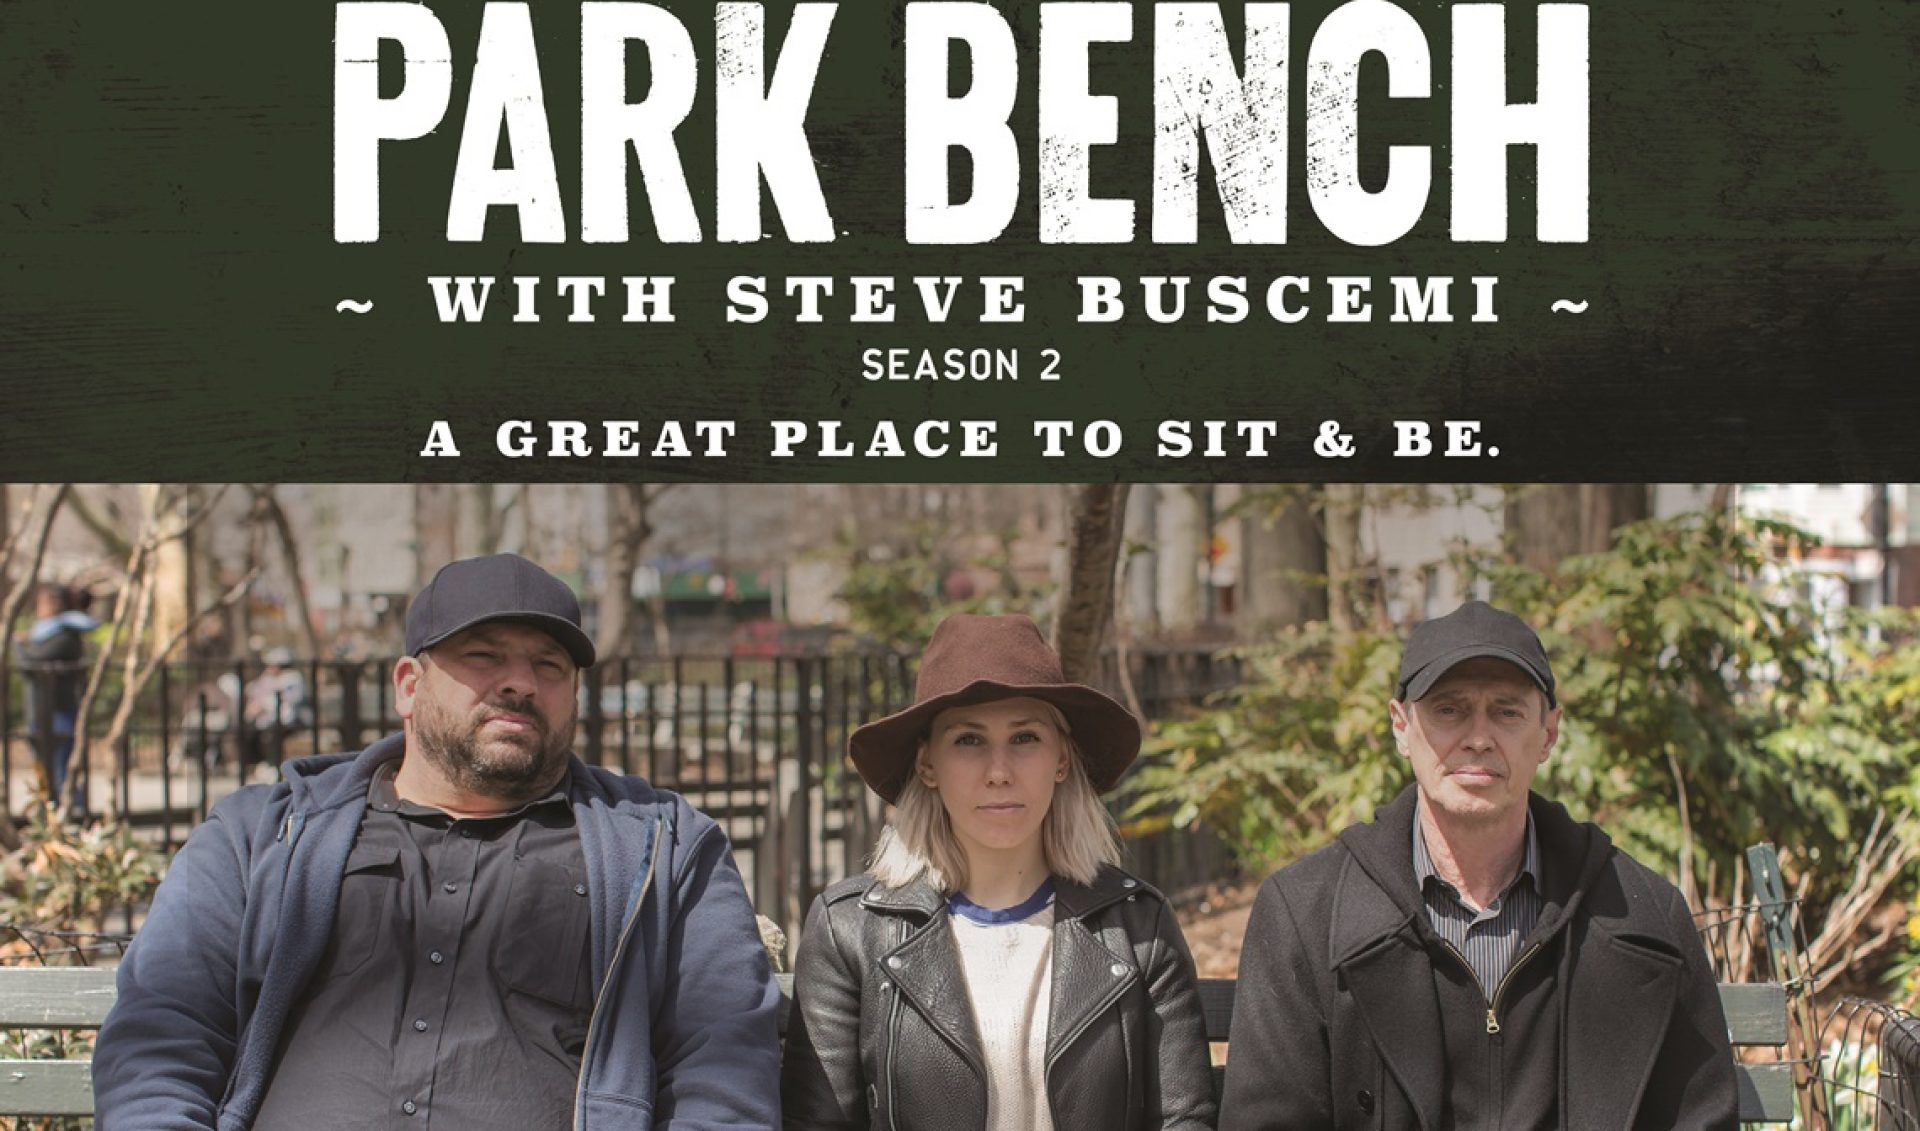 AOL’s ‘Park Bench’ Among Short-Form Emmy Winners, But Some Choices Raise Questions